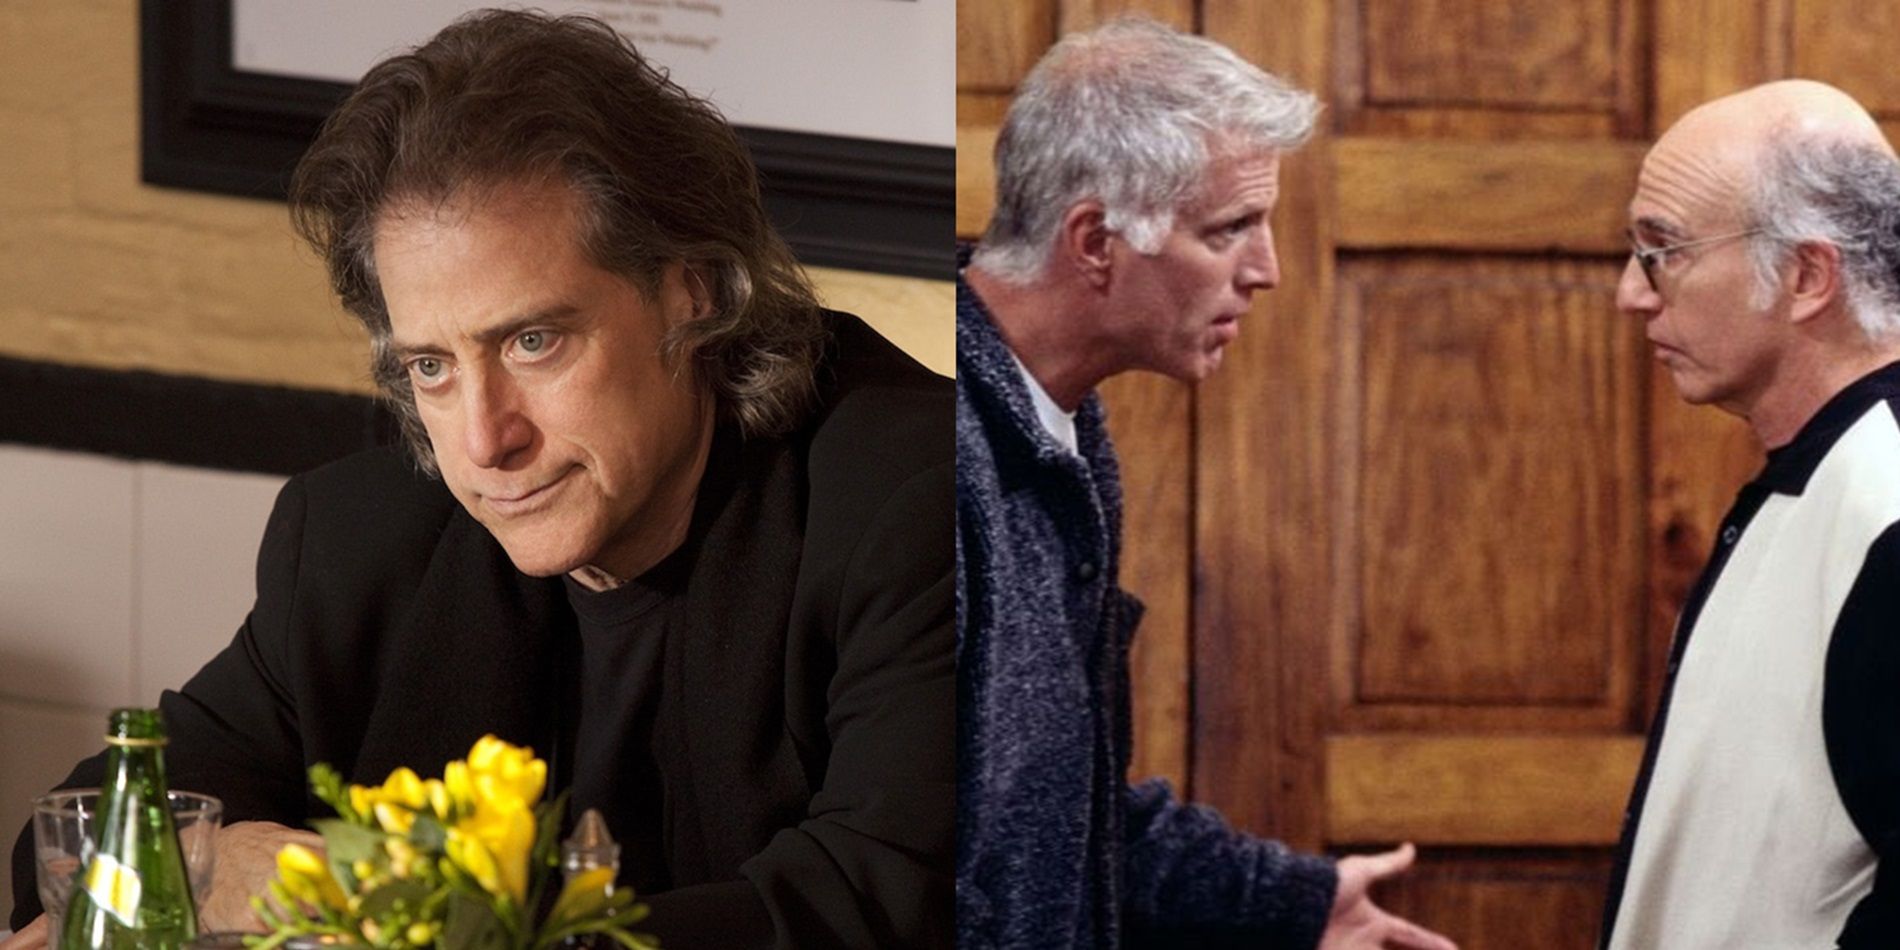 Curb Your Enthusiasm Why Season 11 Will Miss Richard Lewis (& 5 Characters We Hope To See Instead)